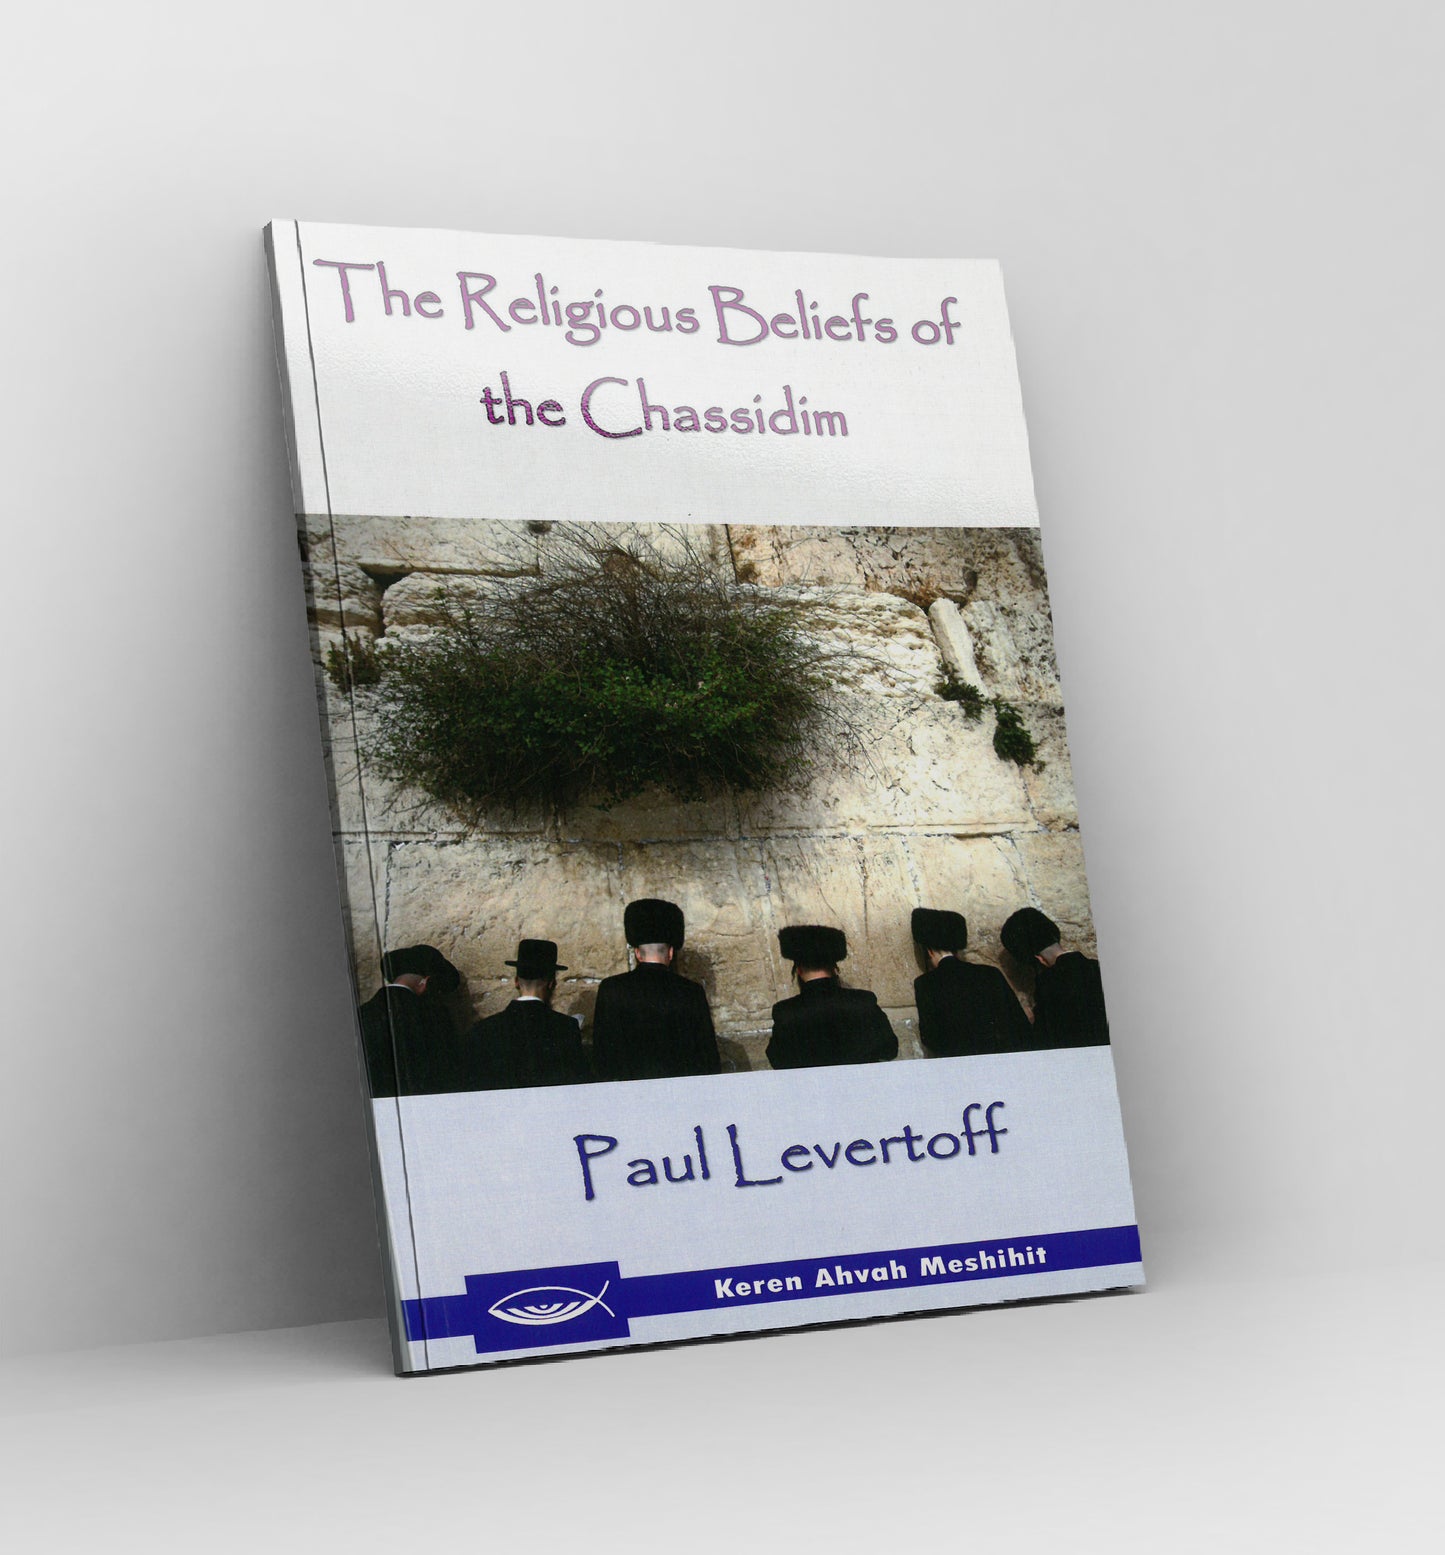 The Religious Beliefs of the Chassidim by Paul Levertoff - Book